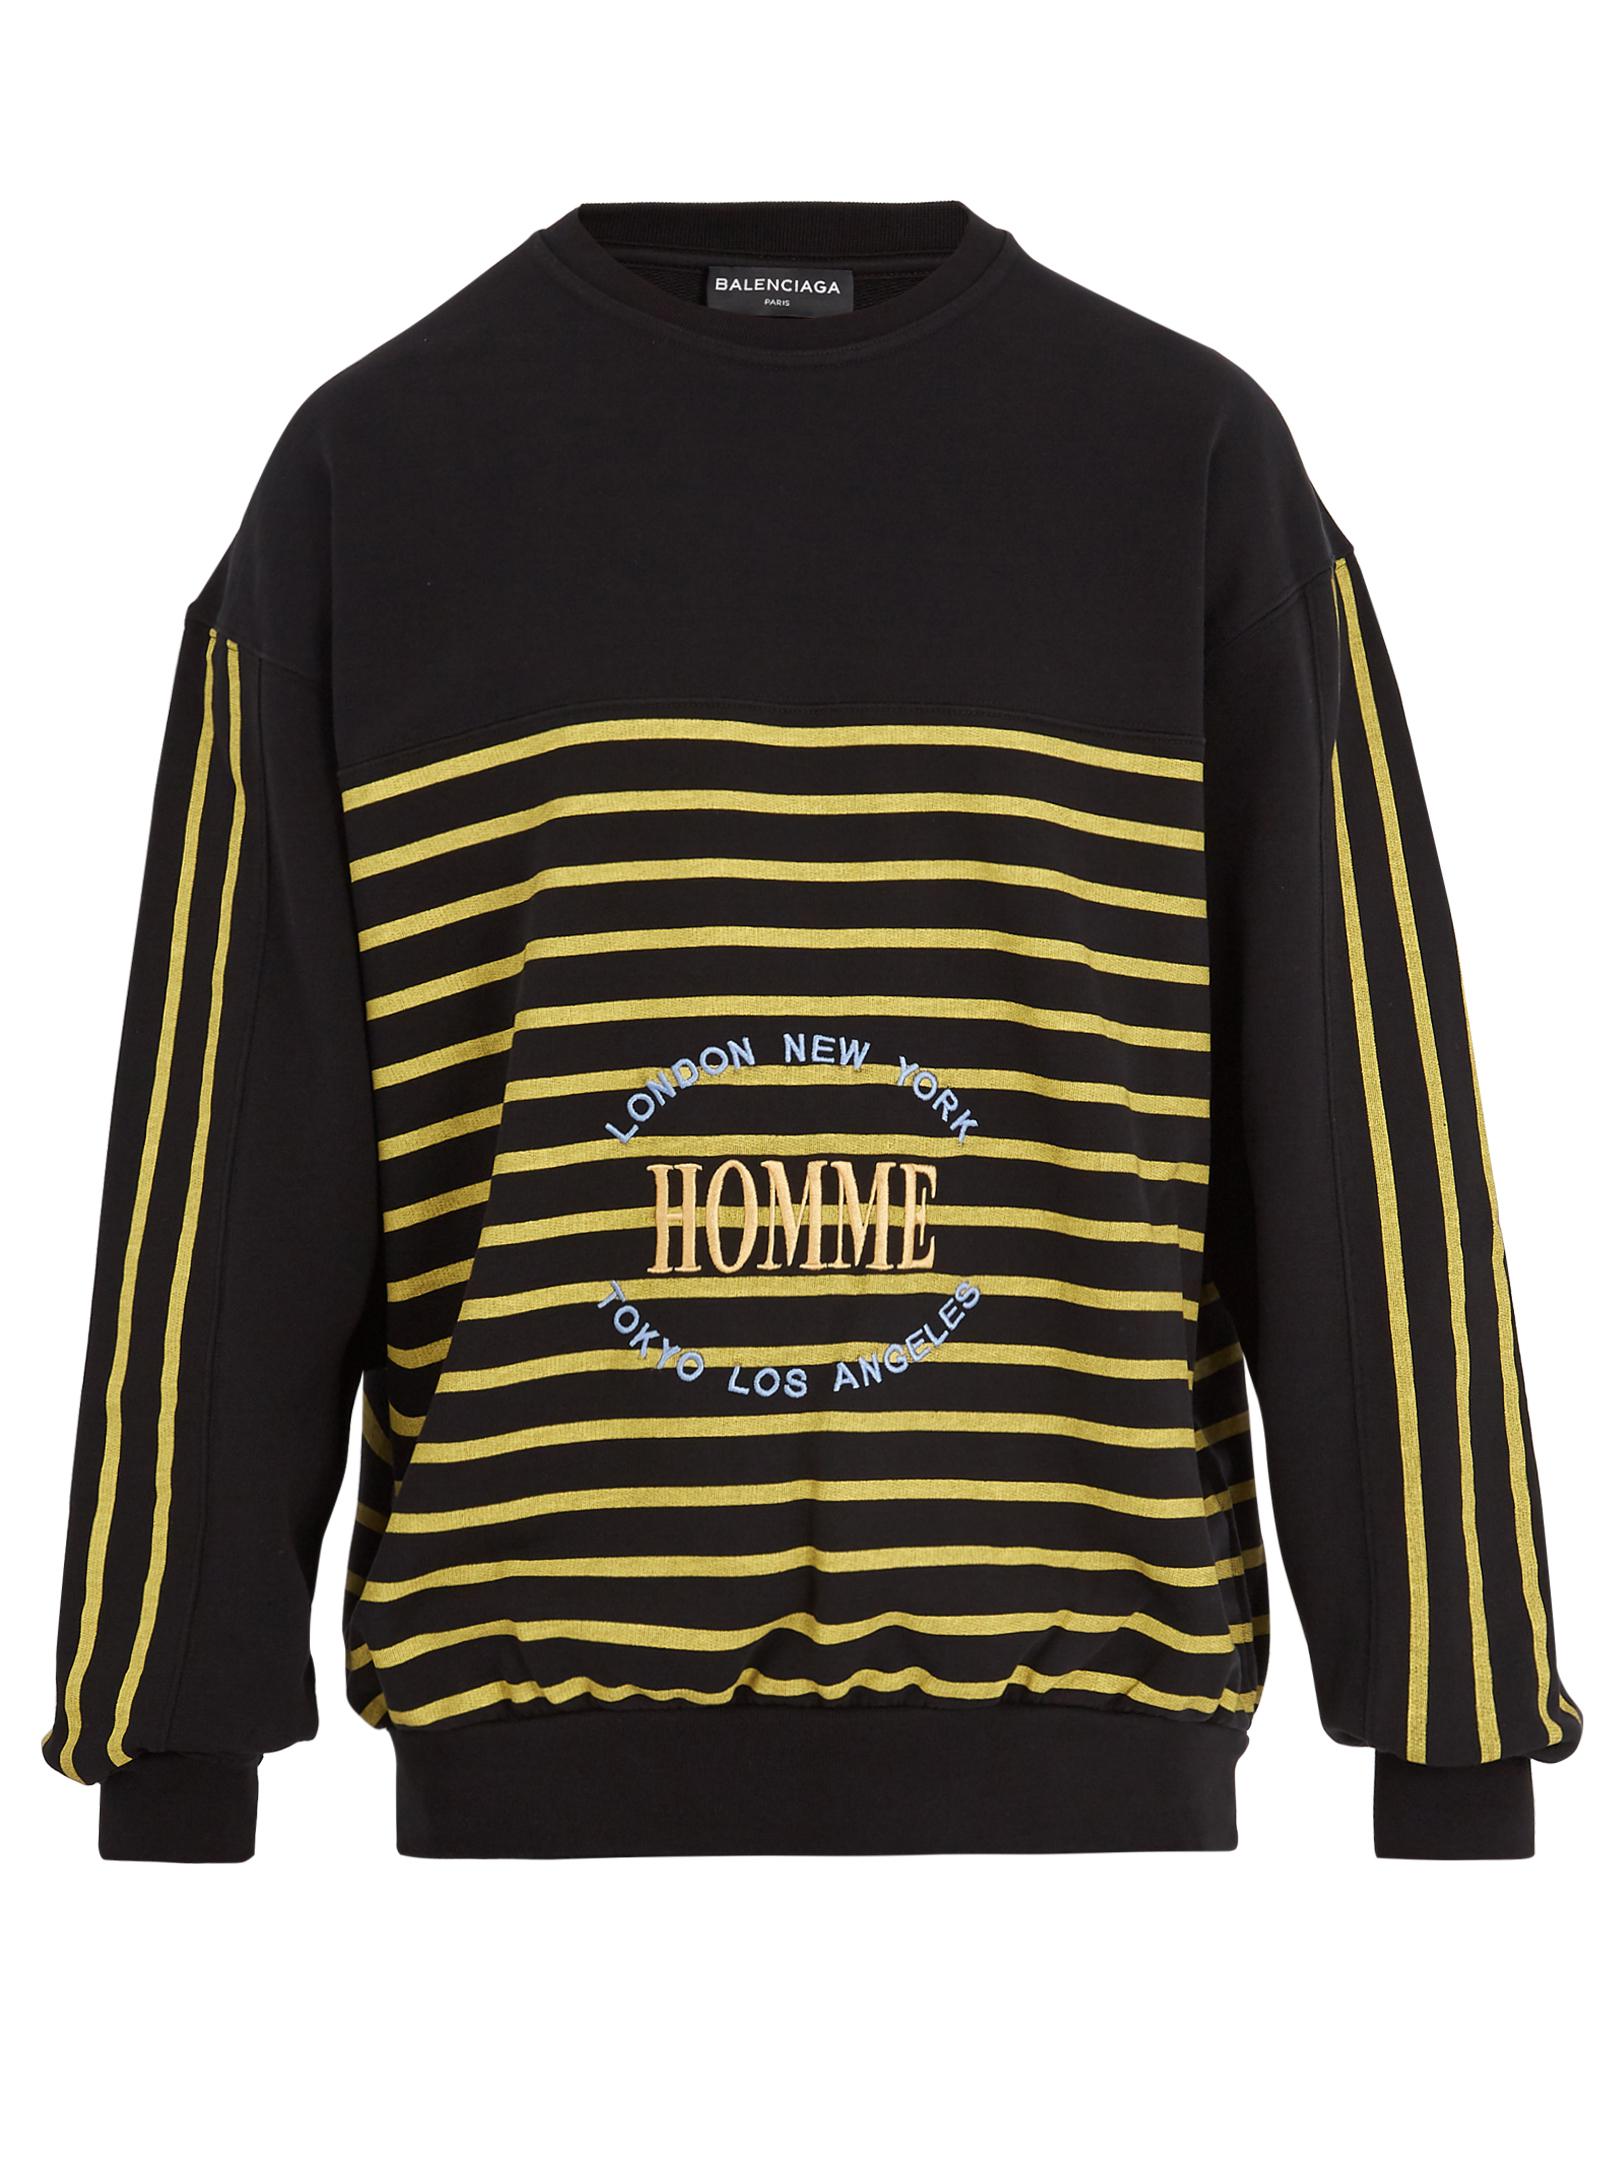 Lyst - Balenciaga Striped-print Homme-embroidered Cotton Sweatshirt in ...